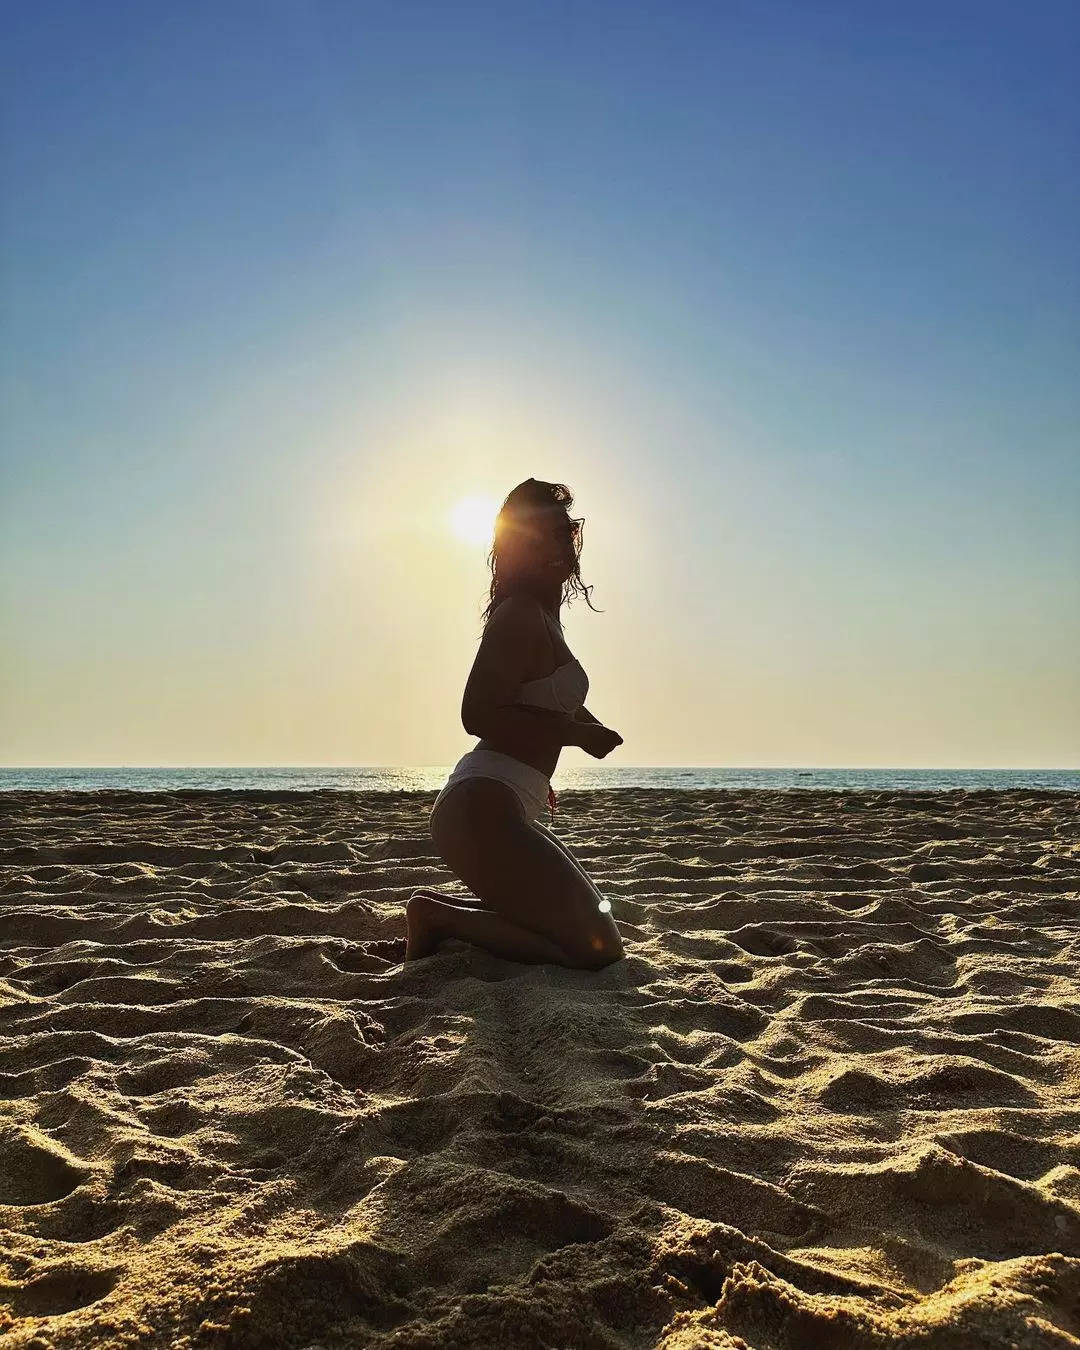 Ileana D’Cruz casts a spell with her mesmerising beach vacation pictures in a bikini